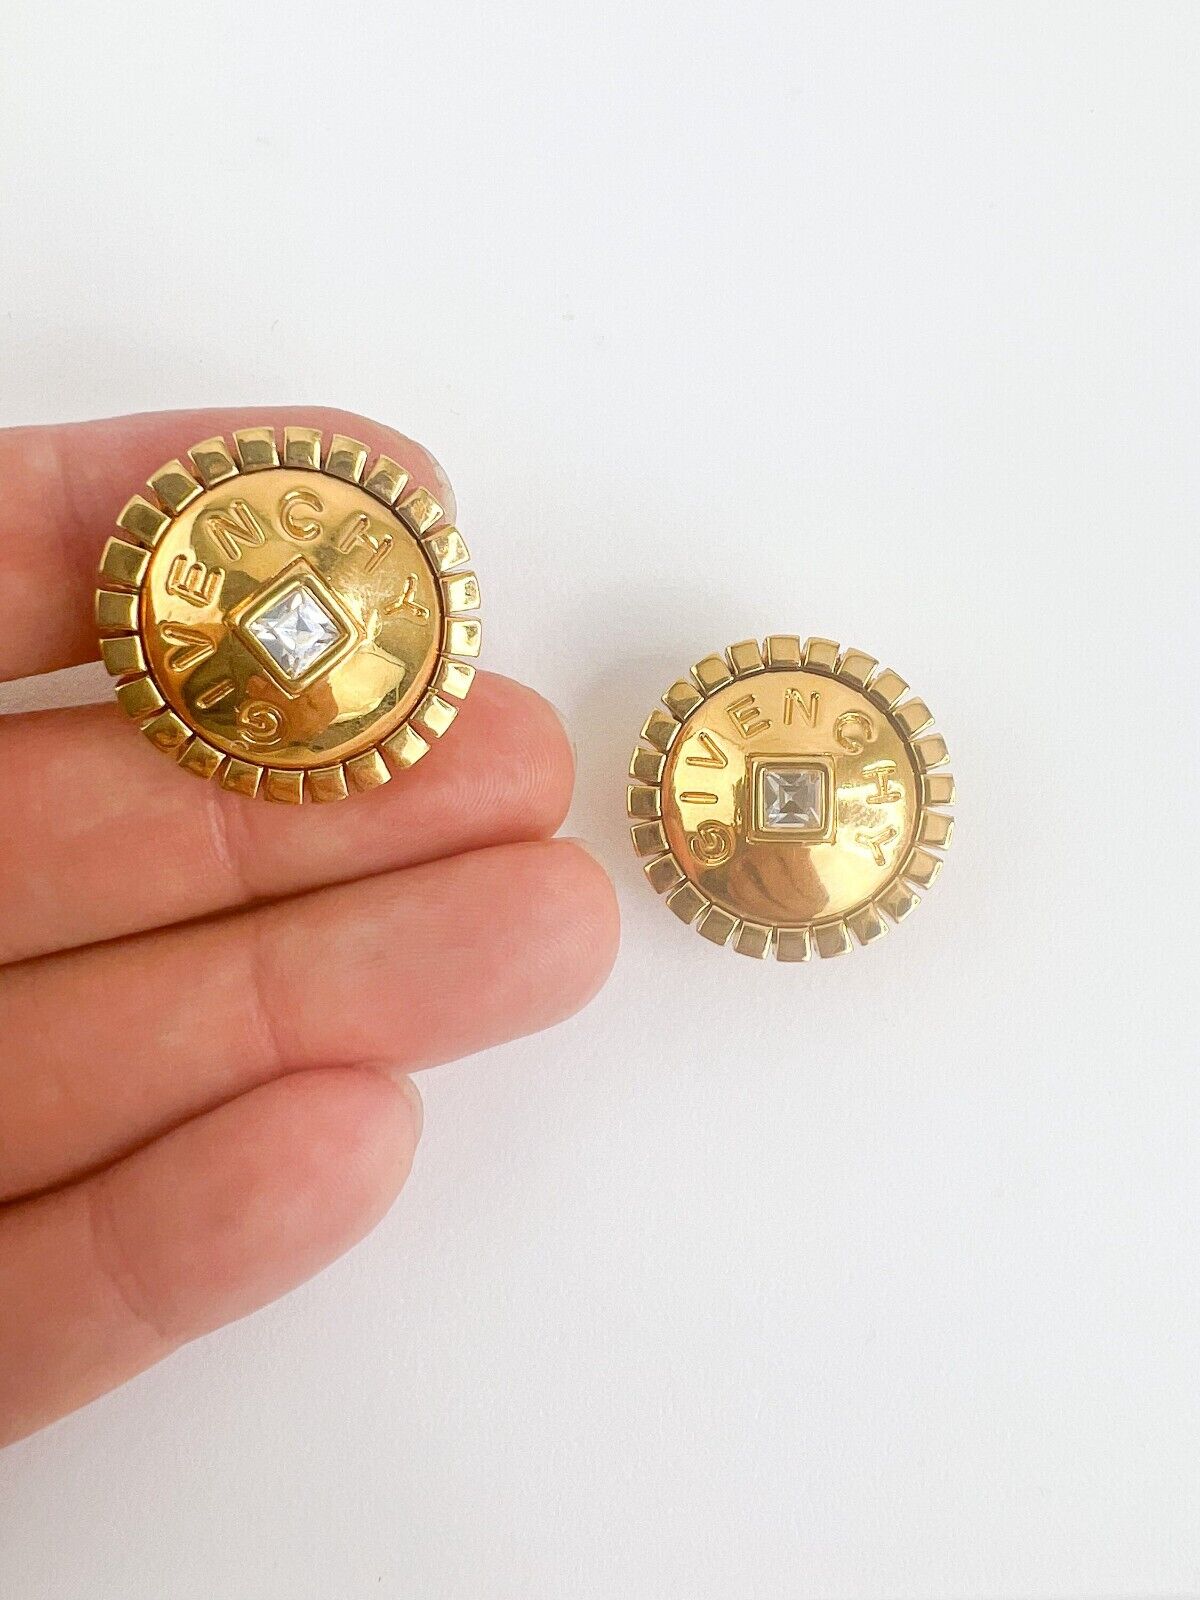 Givenchy Earrings, Vintage Earrings, Round Earrings, Coin Earrings, Bridal Jewelry, Gold round medal, Wedding Jewelry, Jewelry for Women